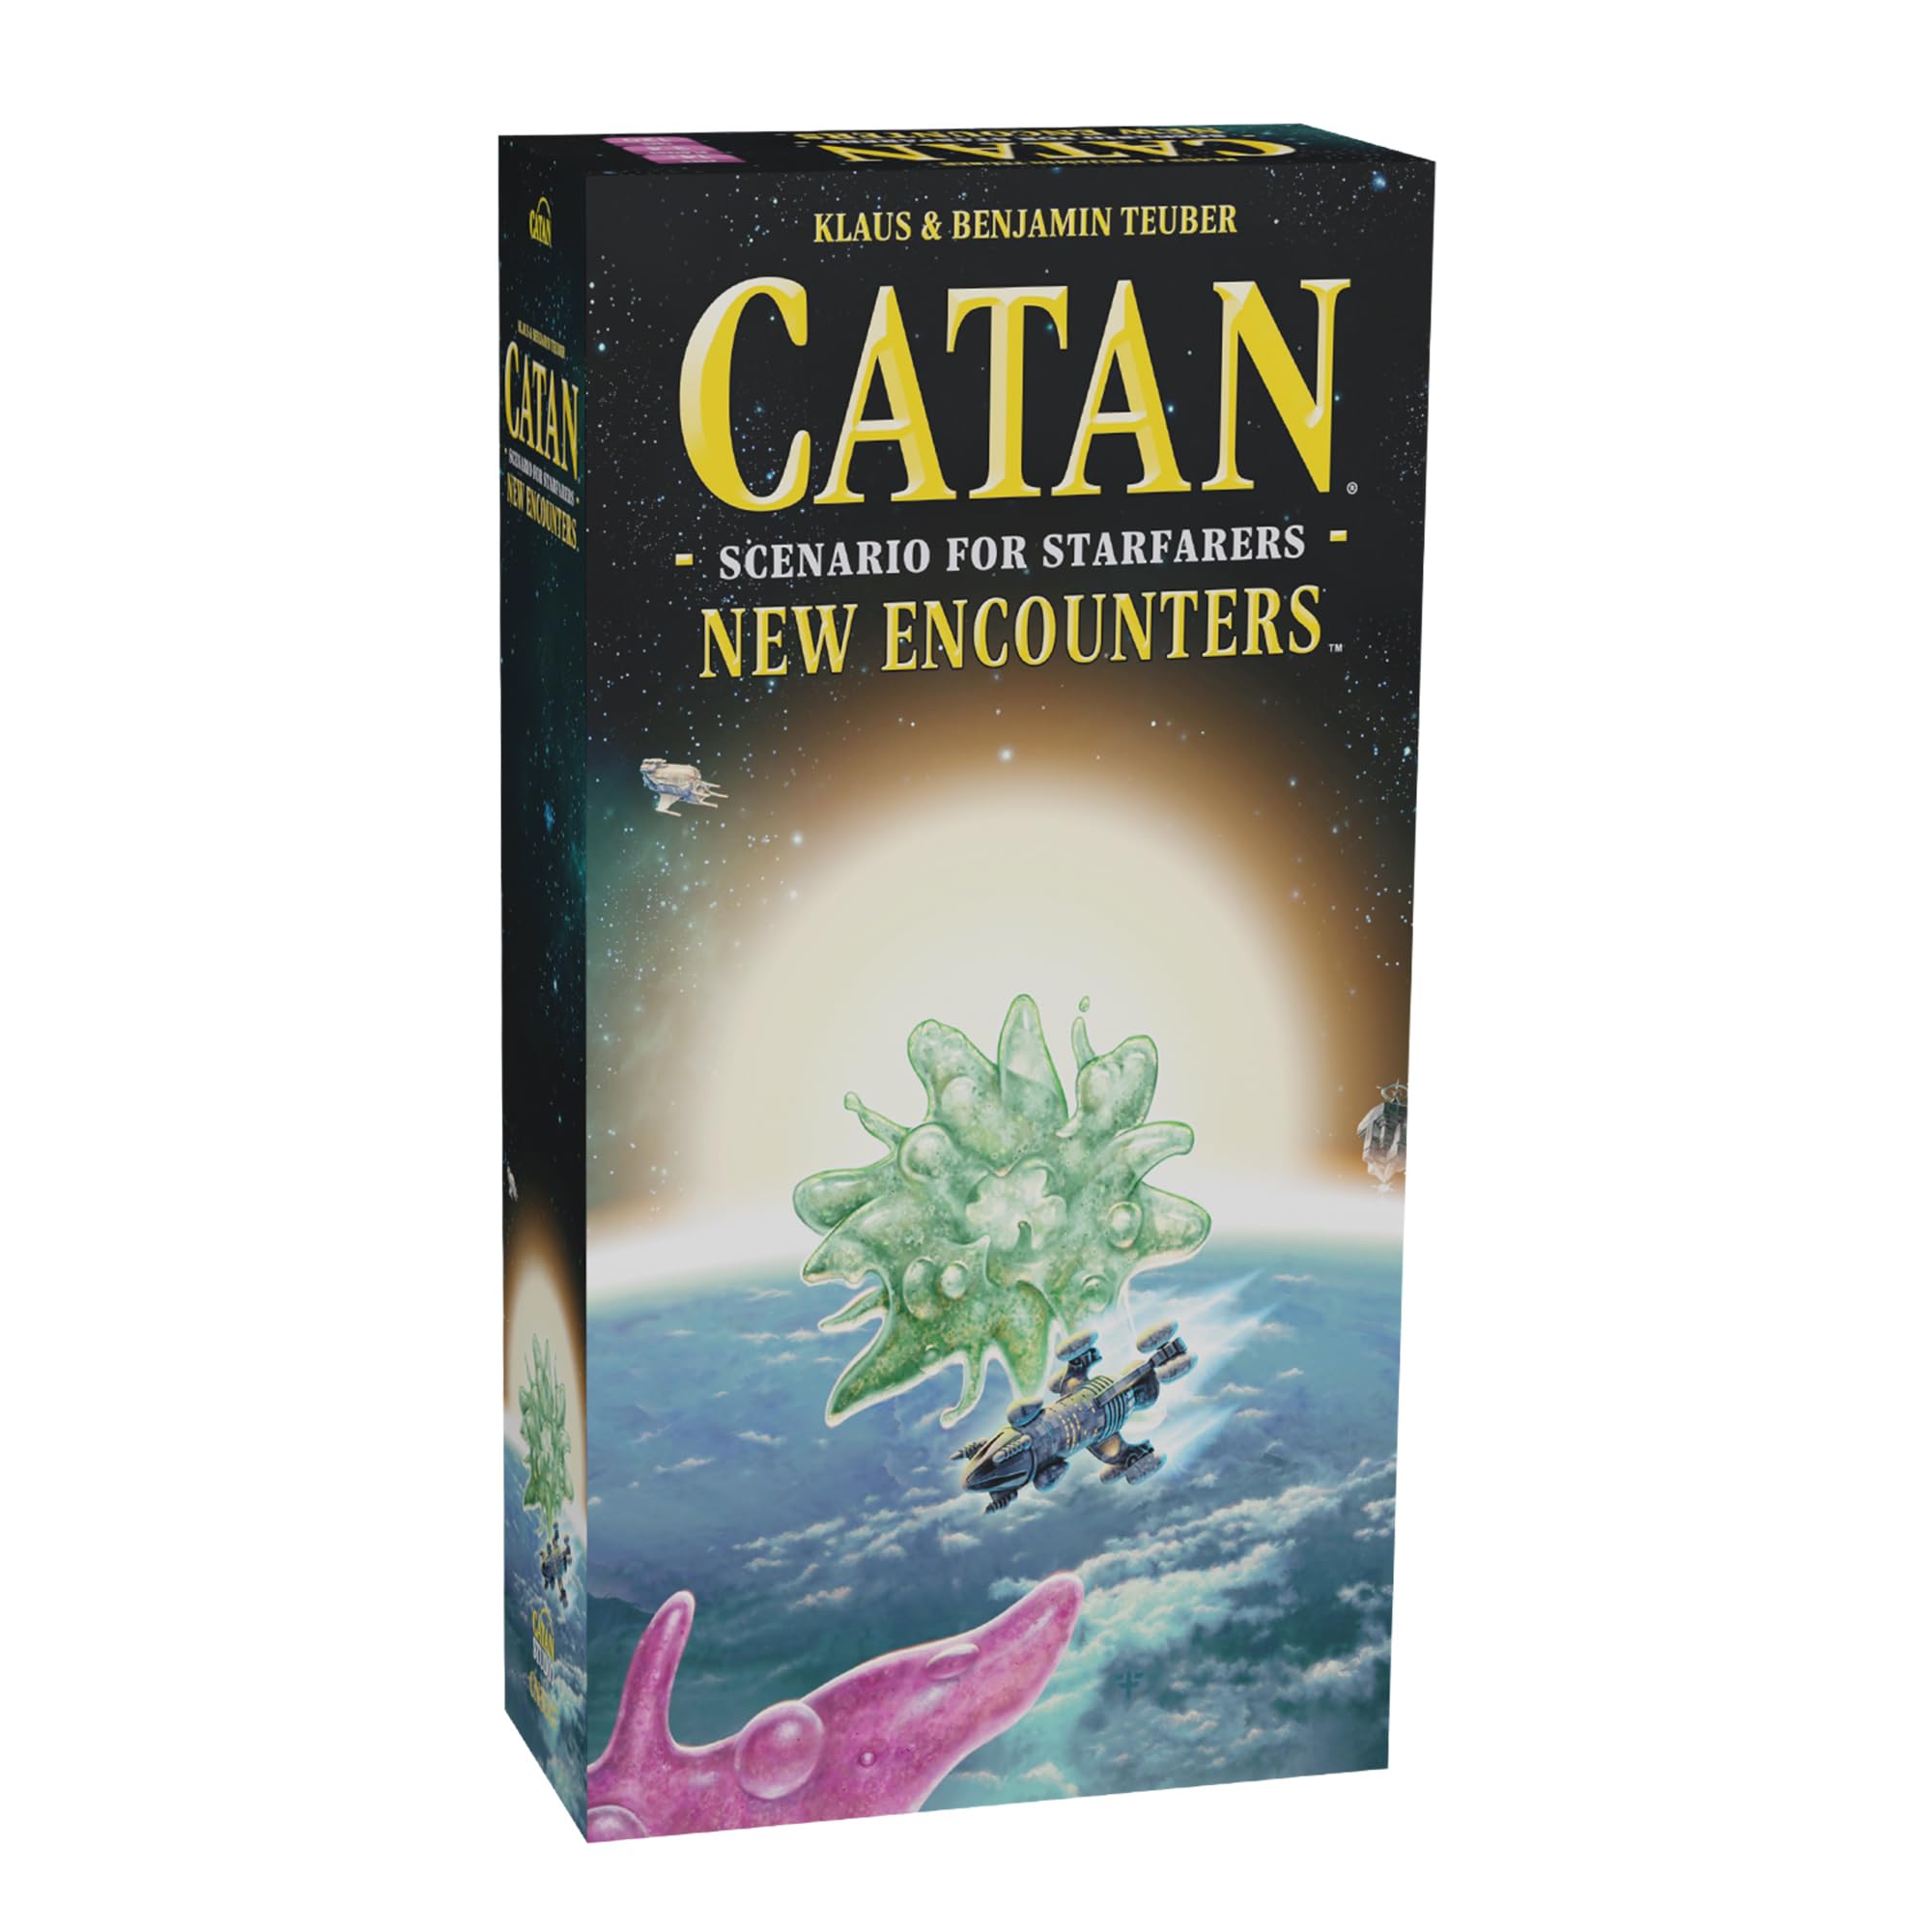 CATAN Starfarers New Encounters Scenario Expansion - Build Your Legacy in Space! Strategy Game for Kids and Adults, Ages 14+, 3-4 Players, 120-150 Minute Playtime, Made by CATAN Studio